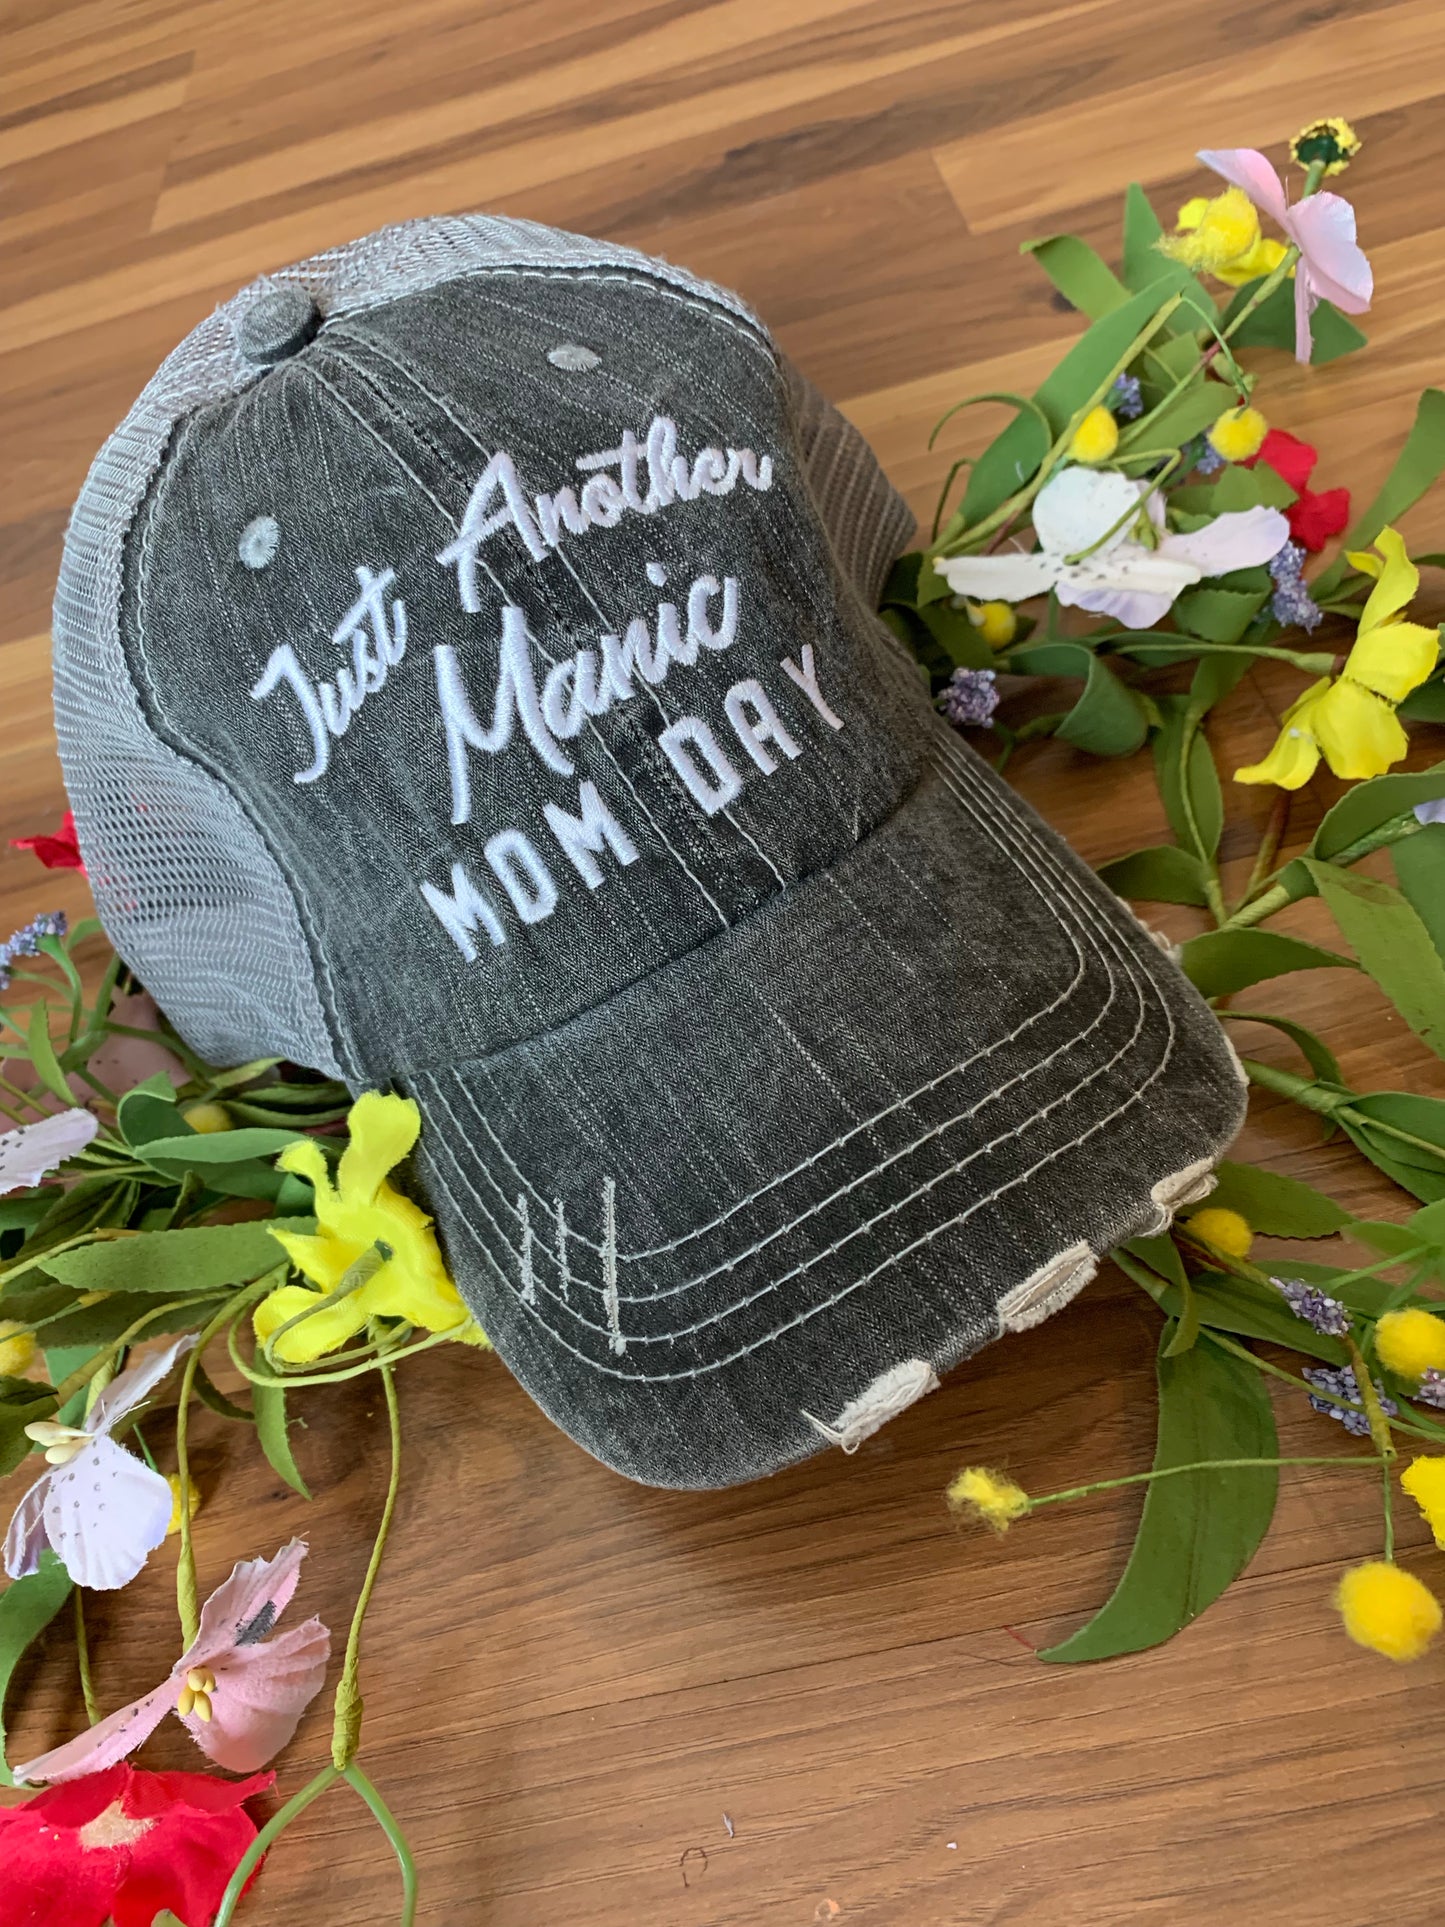 Hats and T-shirts { Just another manic mom day } - Stacy's Pink Martini Boutique